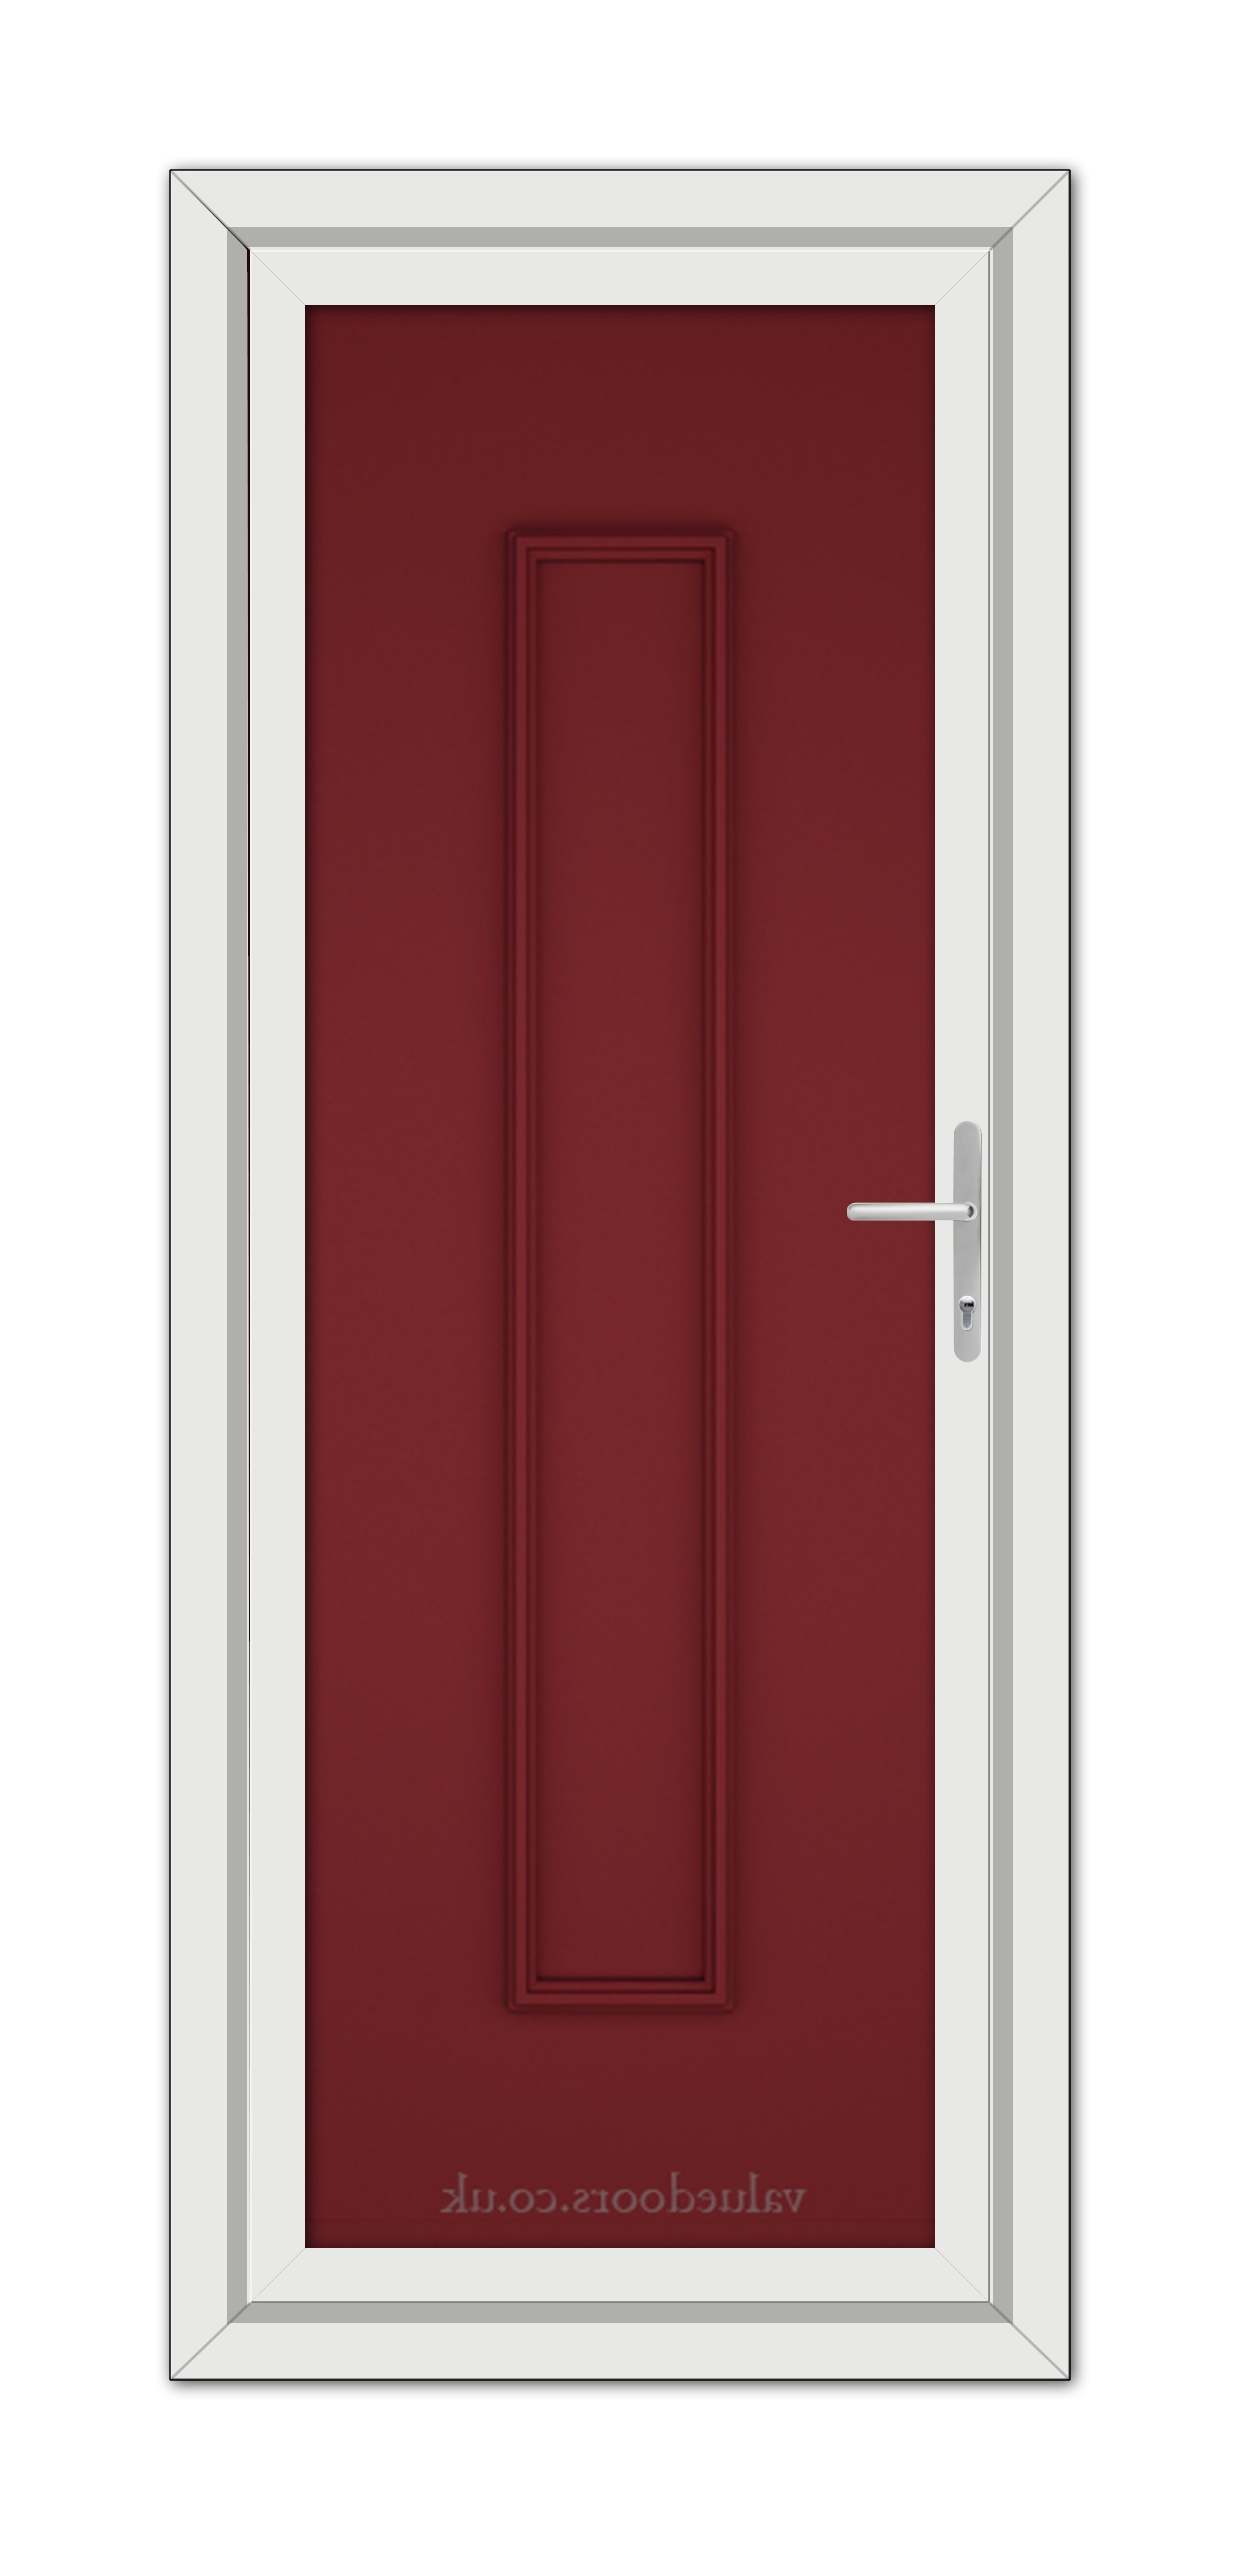 Red Rome Solid uPVC door with white trim.